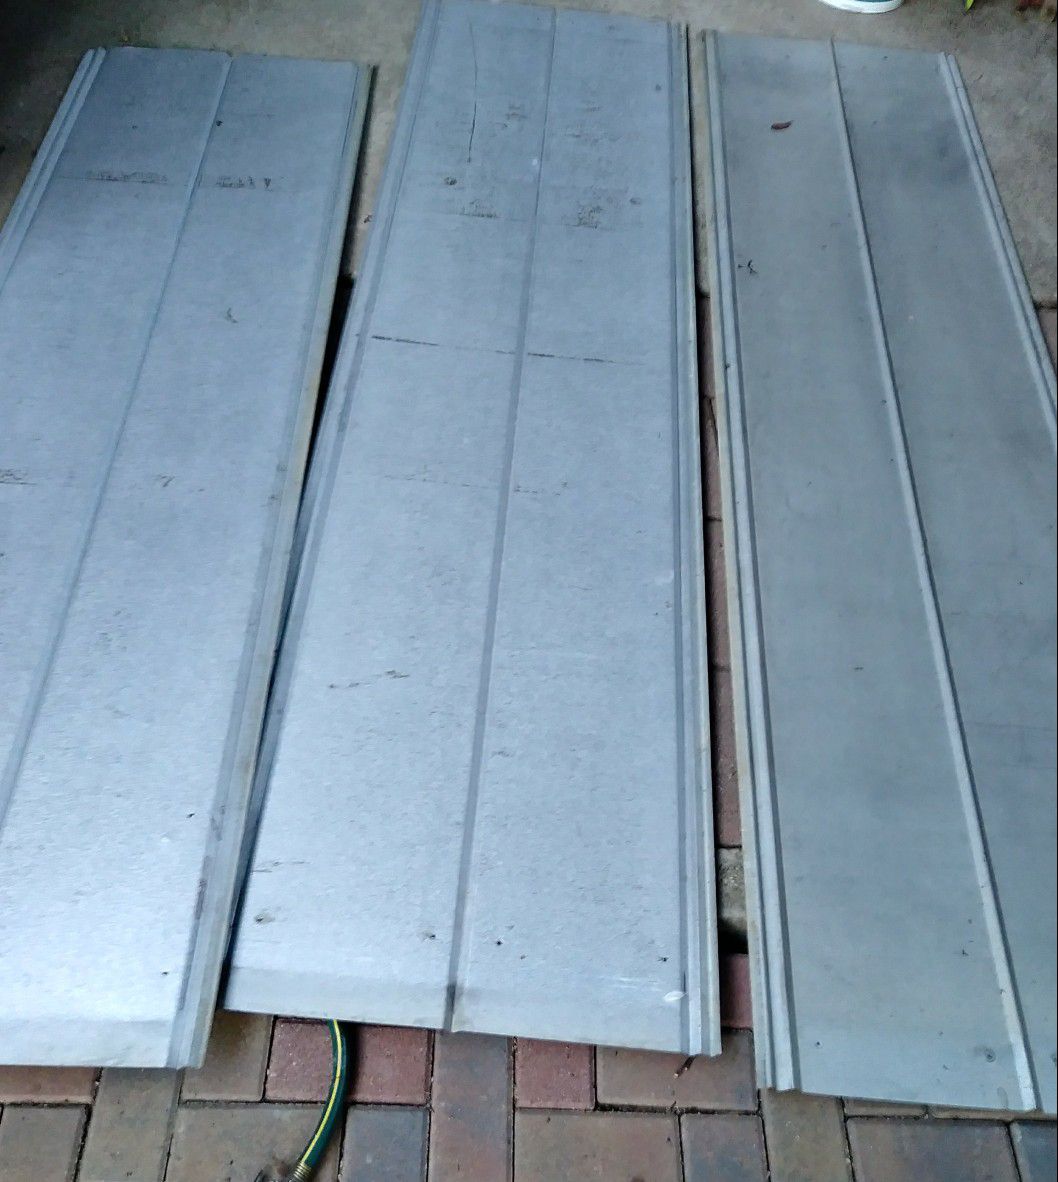 8 Galvanized Sheets $150 for all